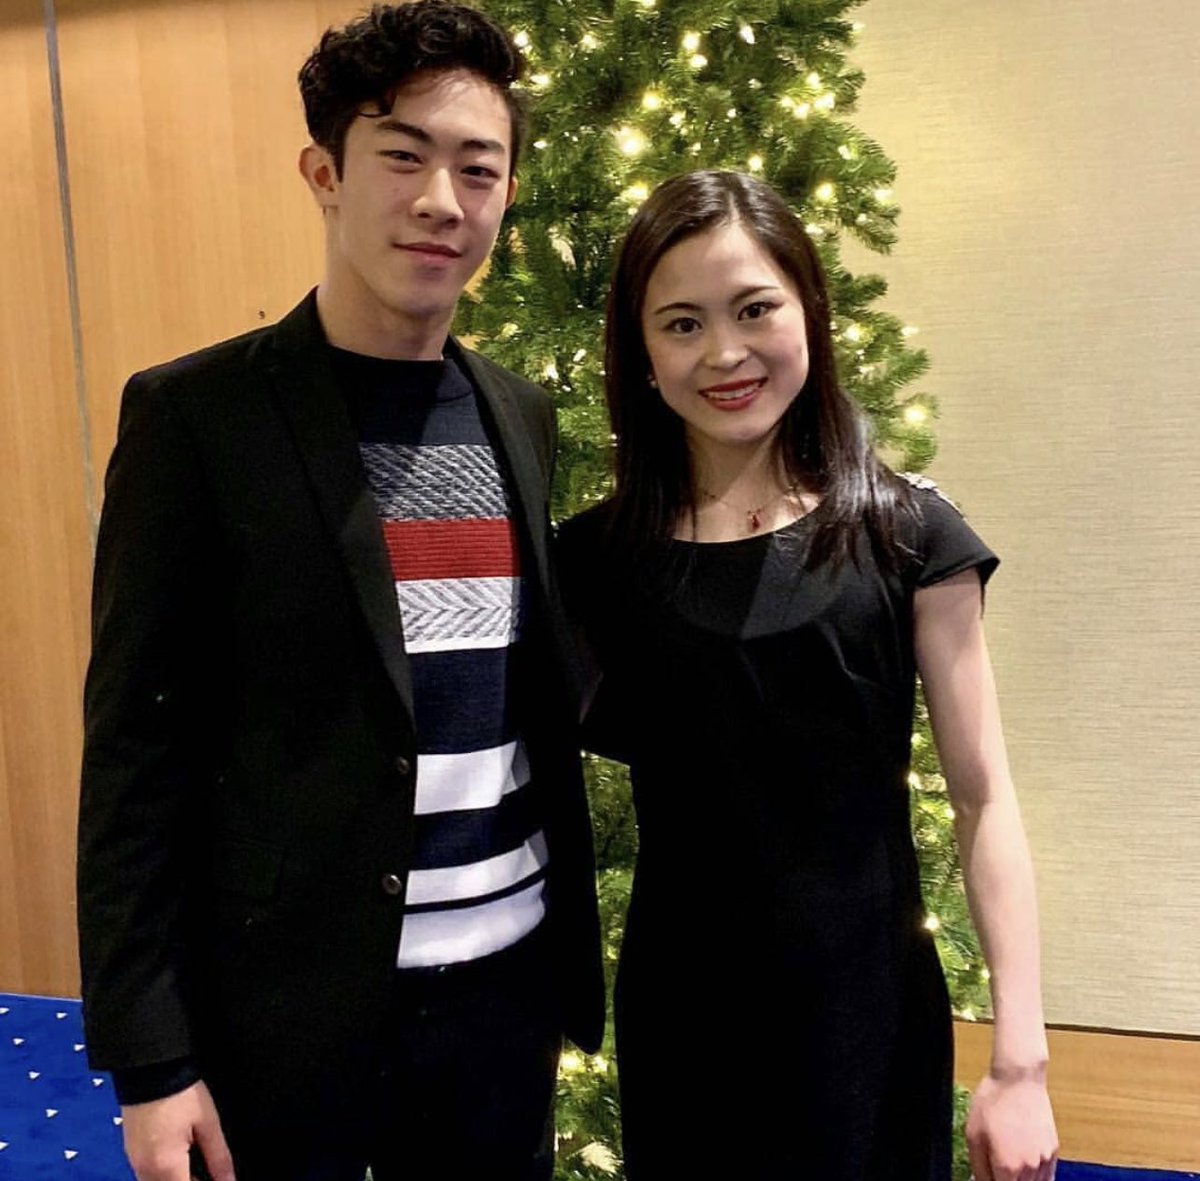 How have I never seen this pic before? Hope they take another one before SOI ends! #NathanChen #SatokoMiyahara